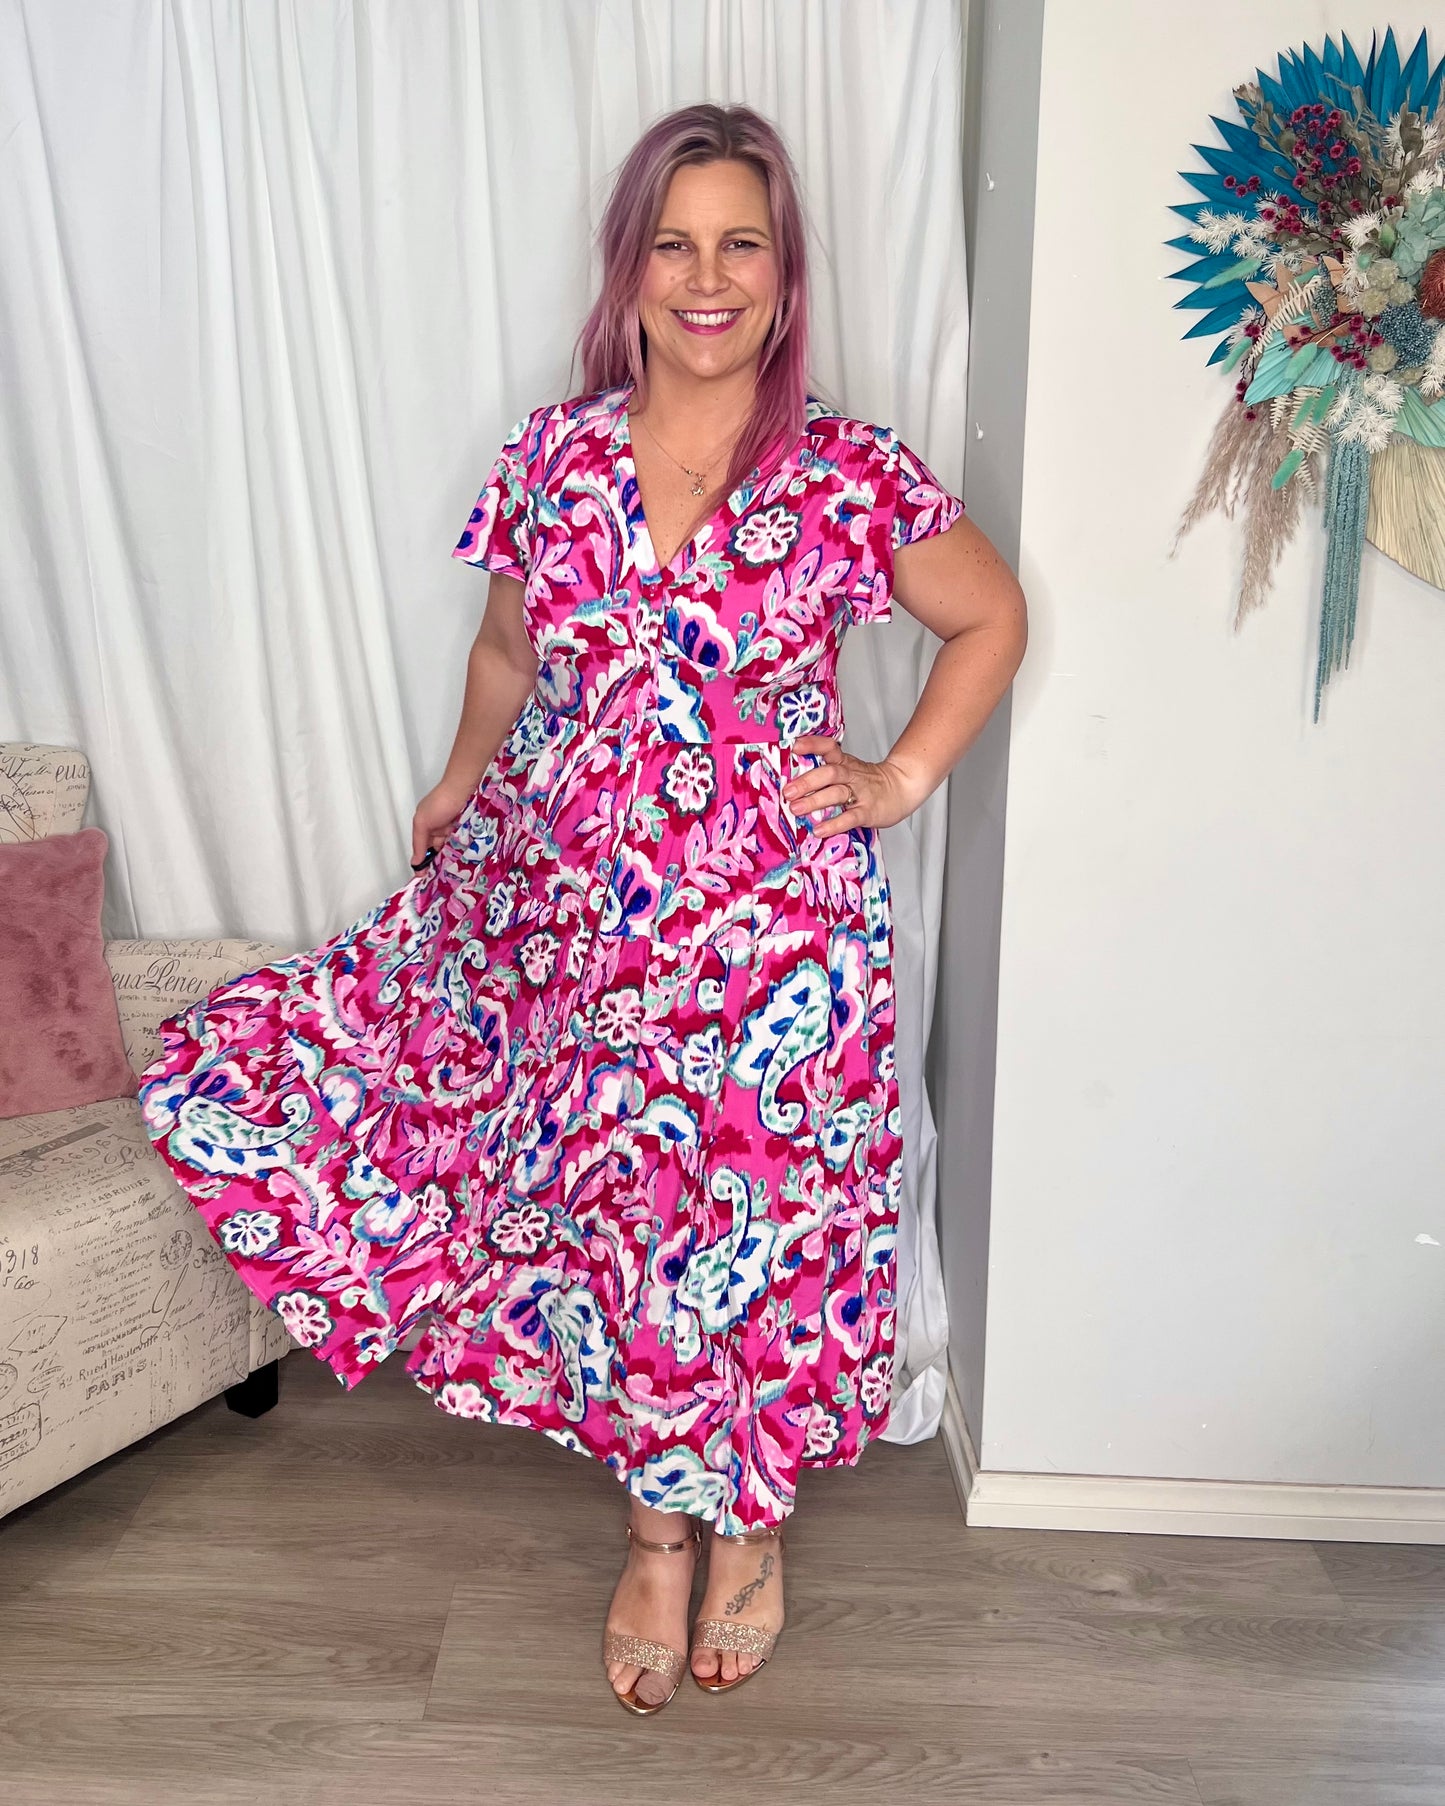 Stella Midi Dress: The Stella Dress features a vibrant pink print in pink and blue, with flutter sleeves and a shirred waist band creating a stunning silhouette
Features:

V-neckline t - Ciao Bella Dresses 